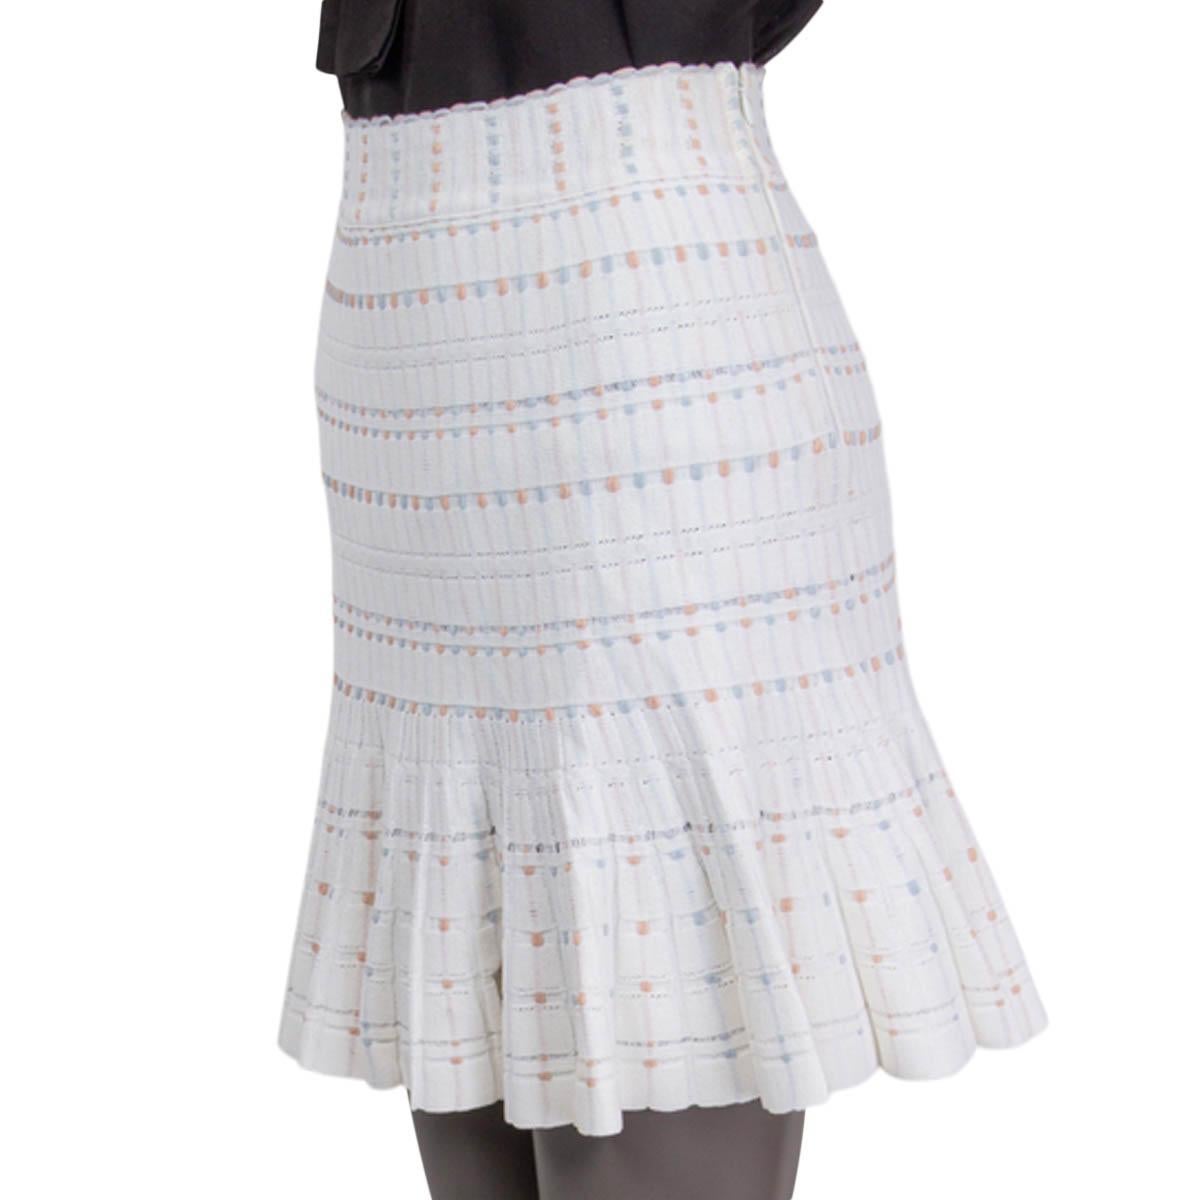 100% authentic Alexander McQueen flared ribbed knit skirt in white, baby pink and baby blue viscose (77%), polyester (15%), cotton (5%) and nylon (3%). Opens with a zipper on the side. Unlined. Has been worn and is in excellent condition. Matching